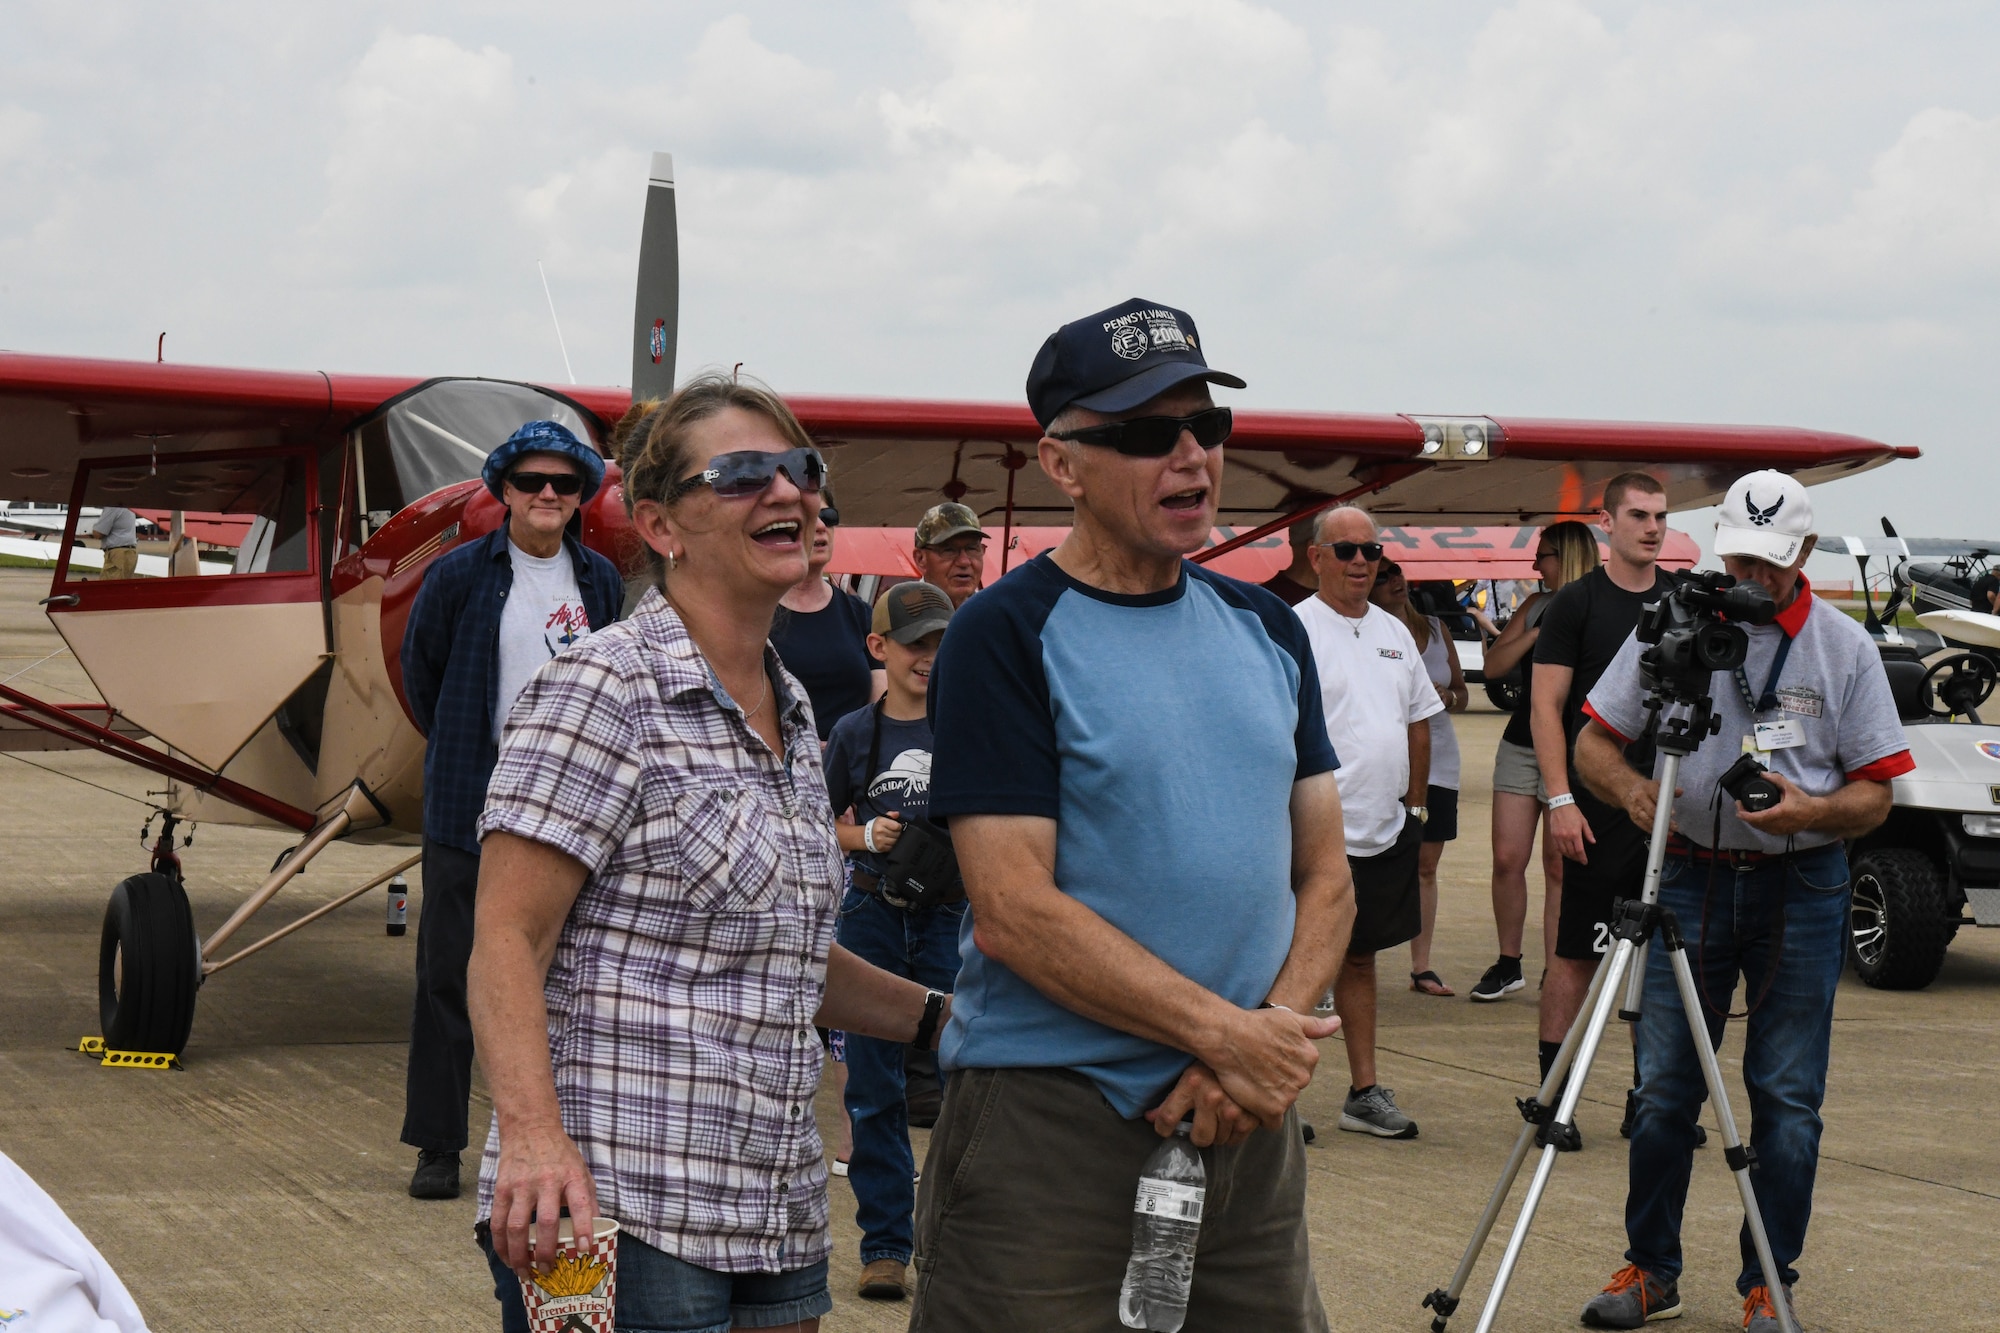 Event guests sing “Happy Birthday” to celebrate the Air Force Reserve’s 75th birthday, Aug. 6, 2023, at the Wings and Wheels Fly-In and Car Show at Youngstown-Warren Regional Airport, Ohio.